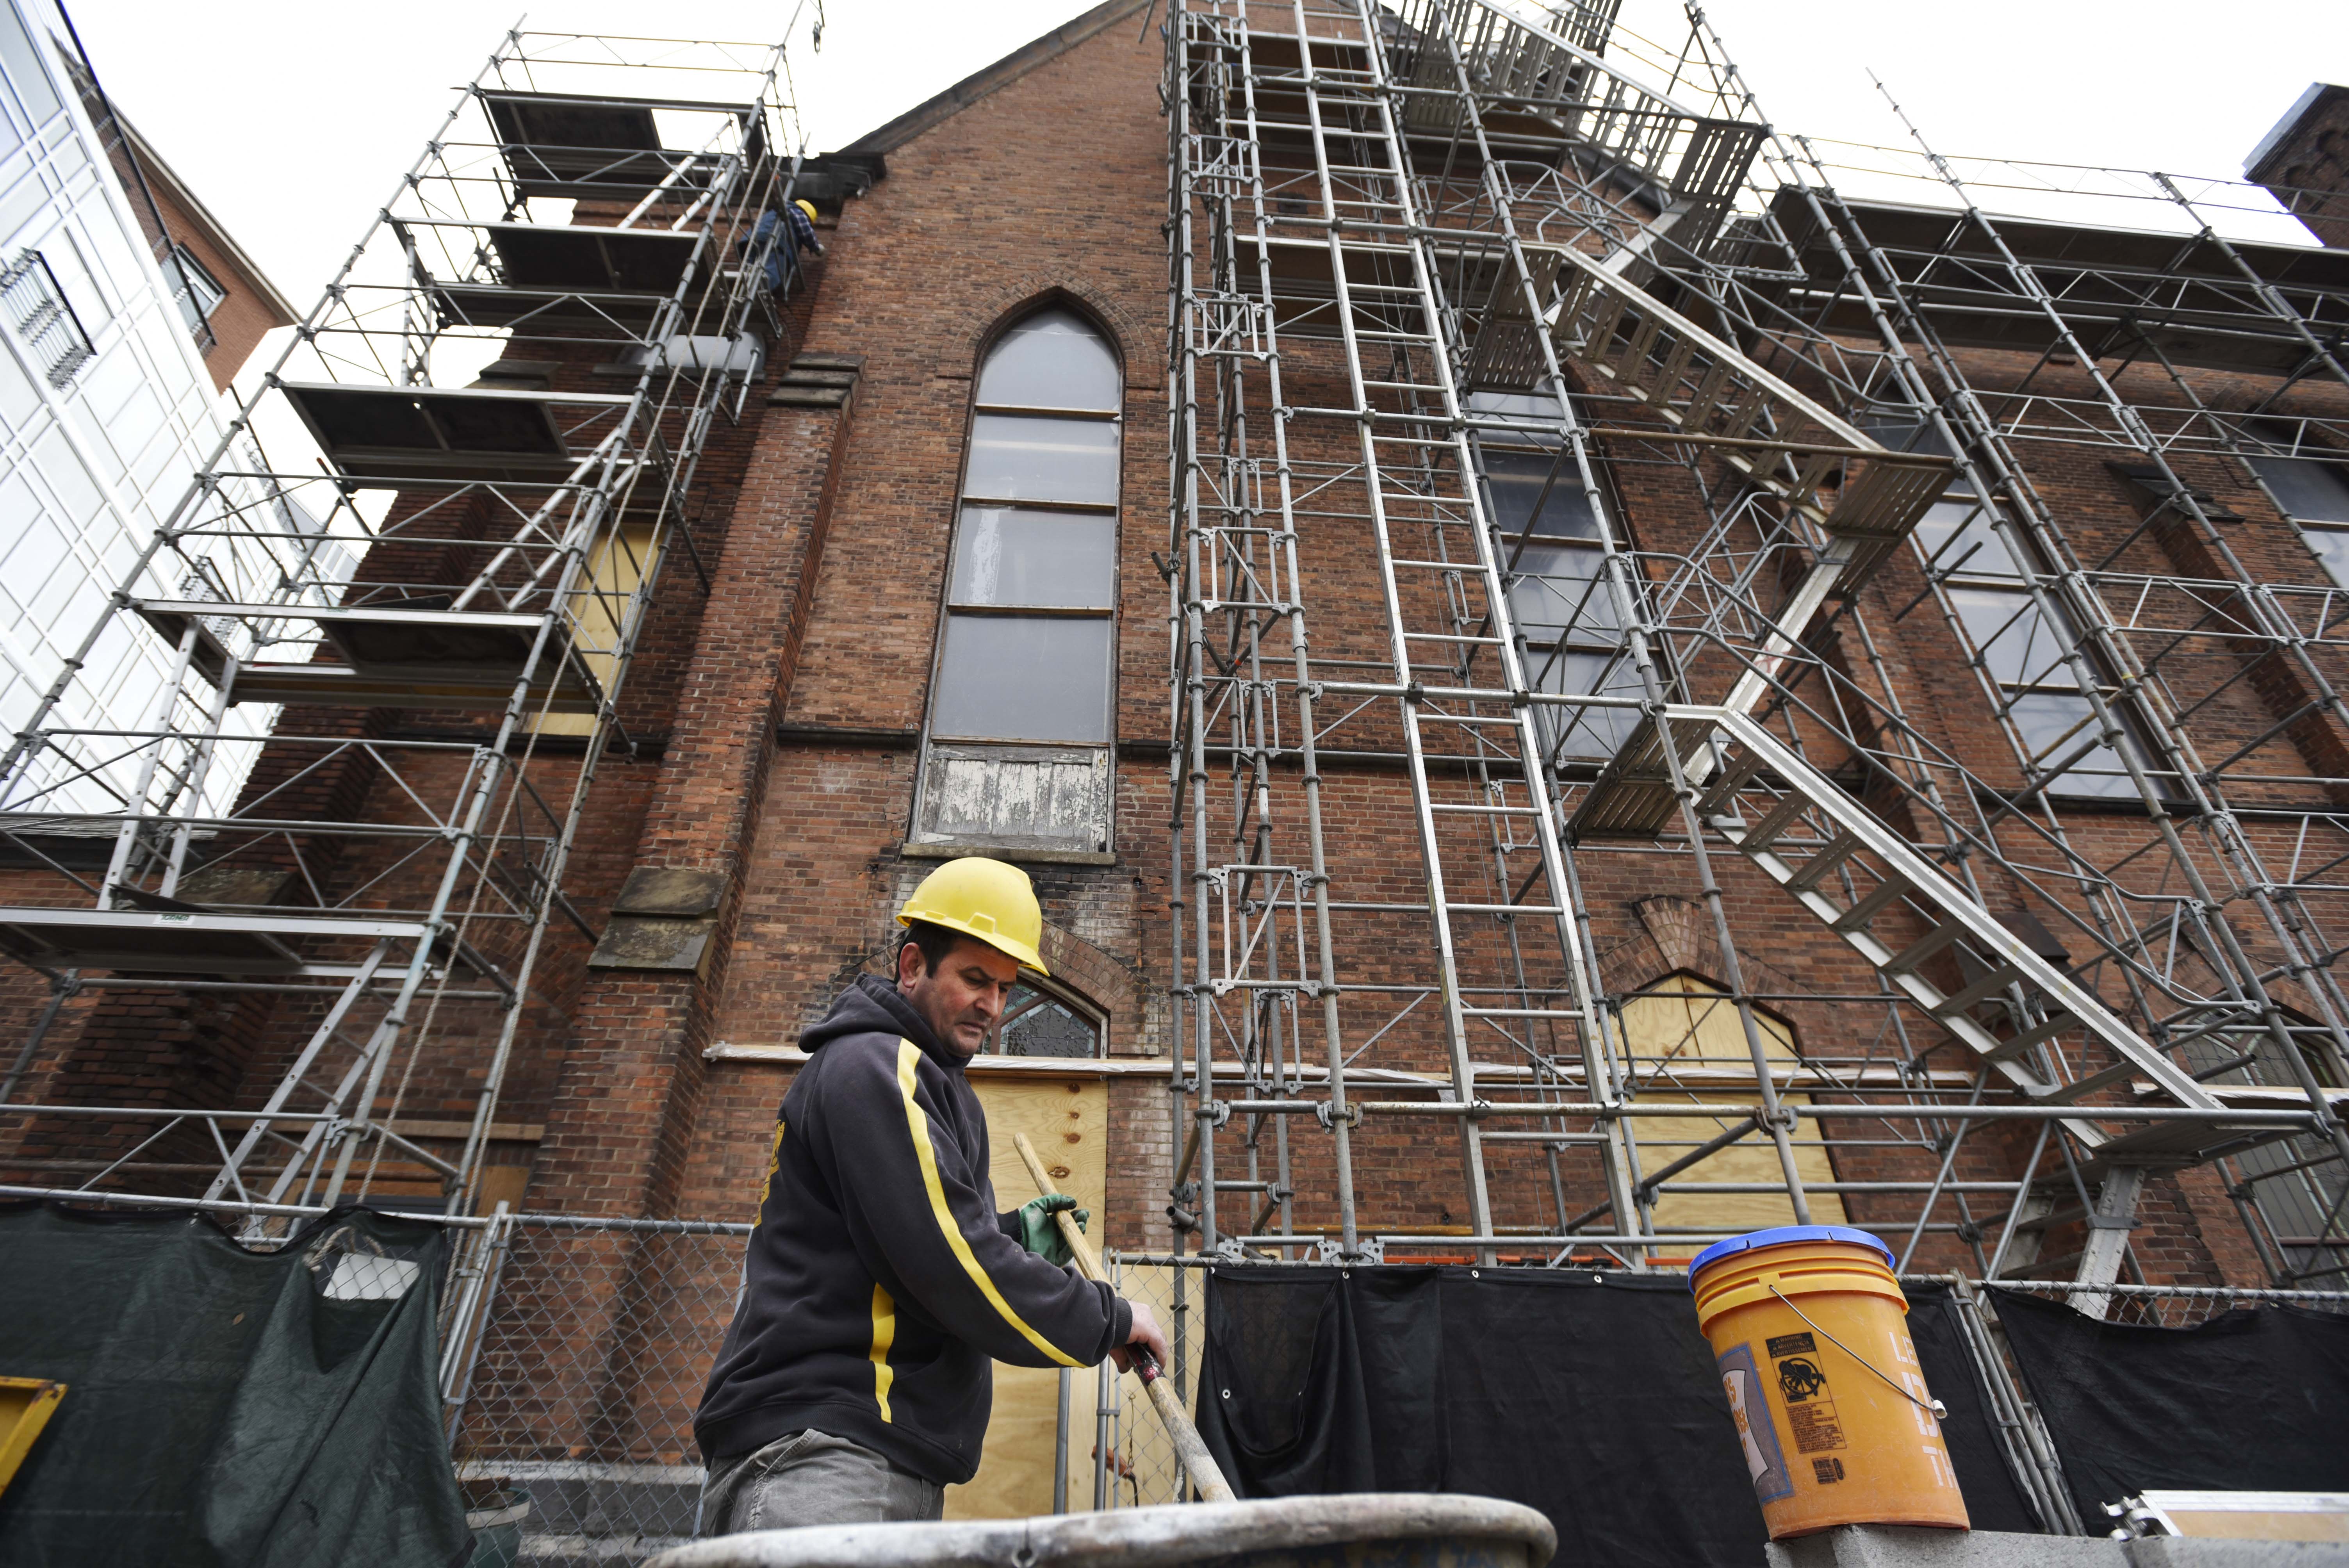 A construction workers mixes lime to use in brick restoration work on the exterior of Universal Preservation Hall in Saratoga Tuesday, April 9, 2019.